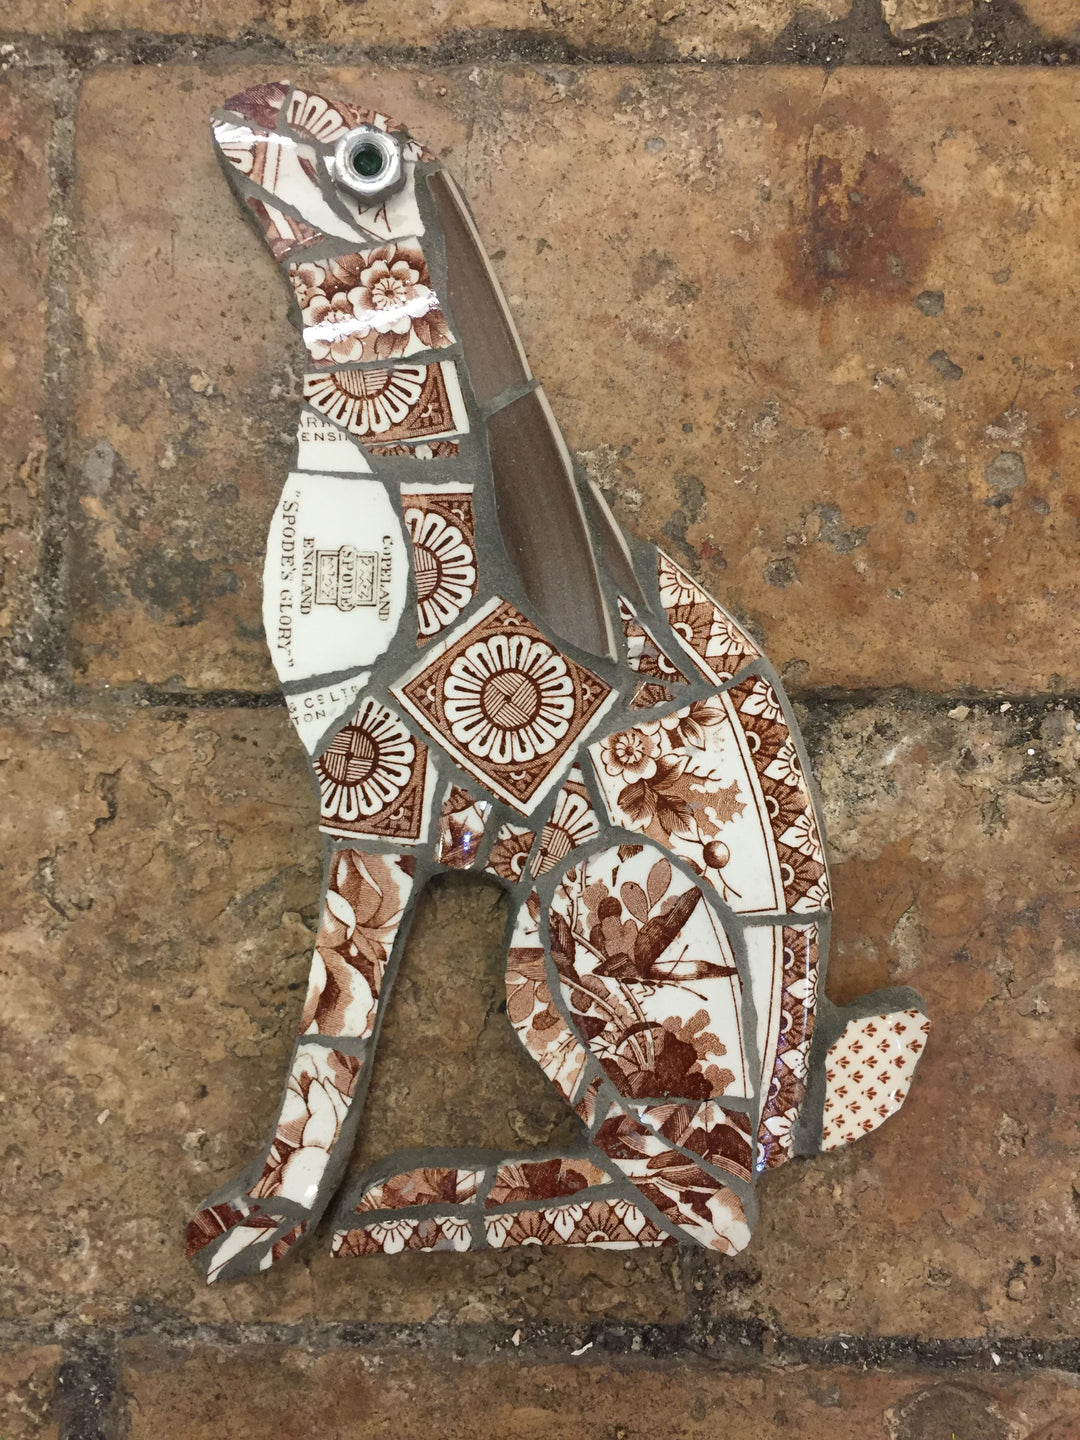 mosaic hare made with broken crockery and glass